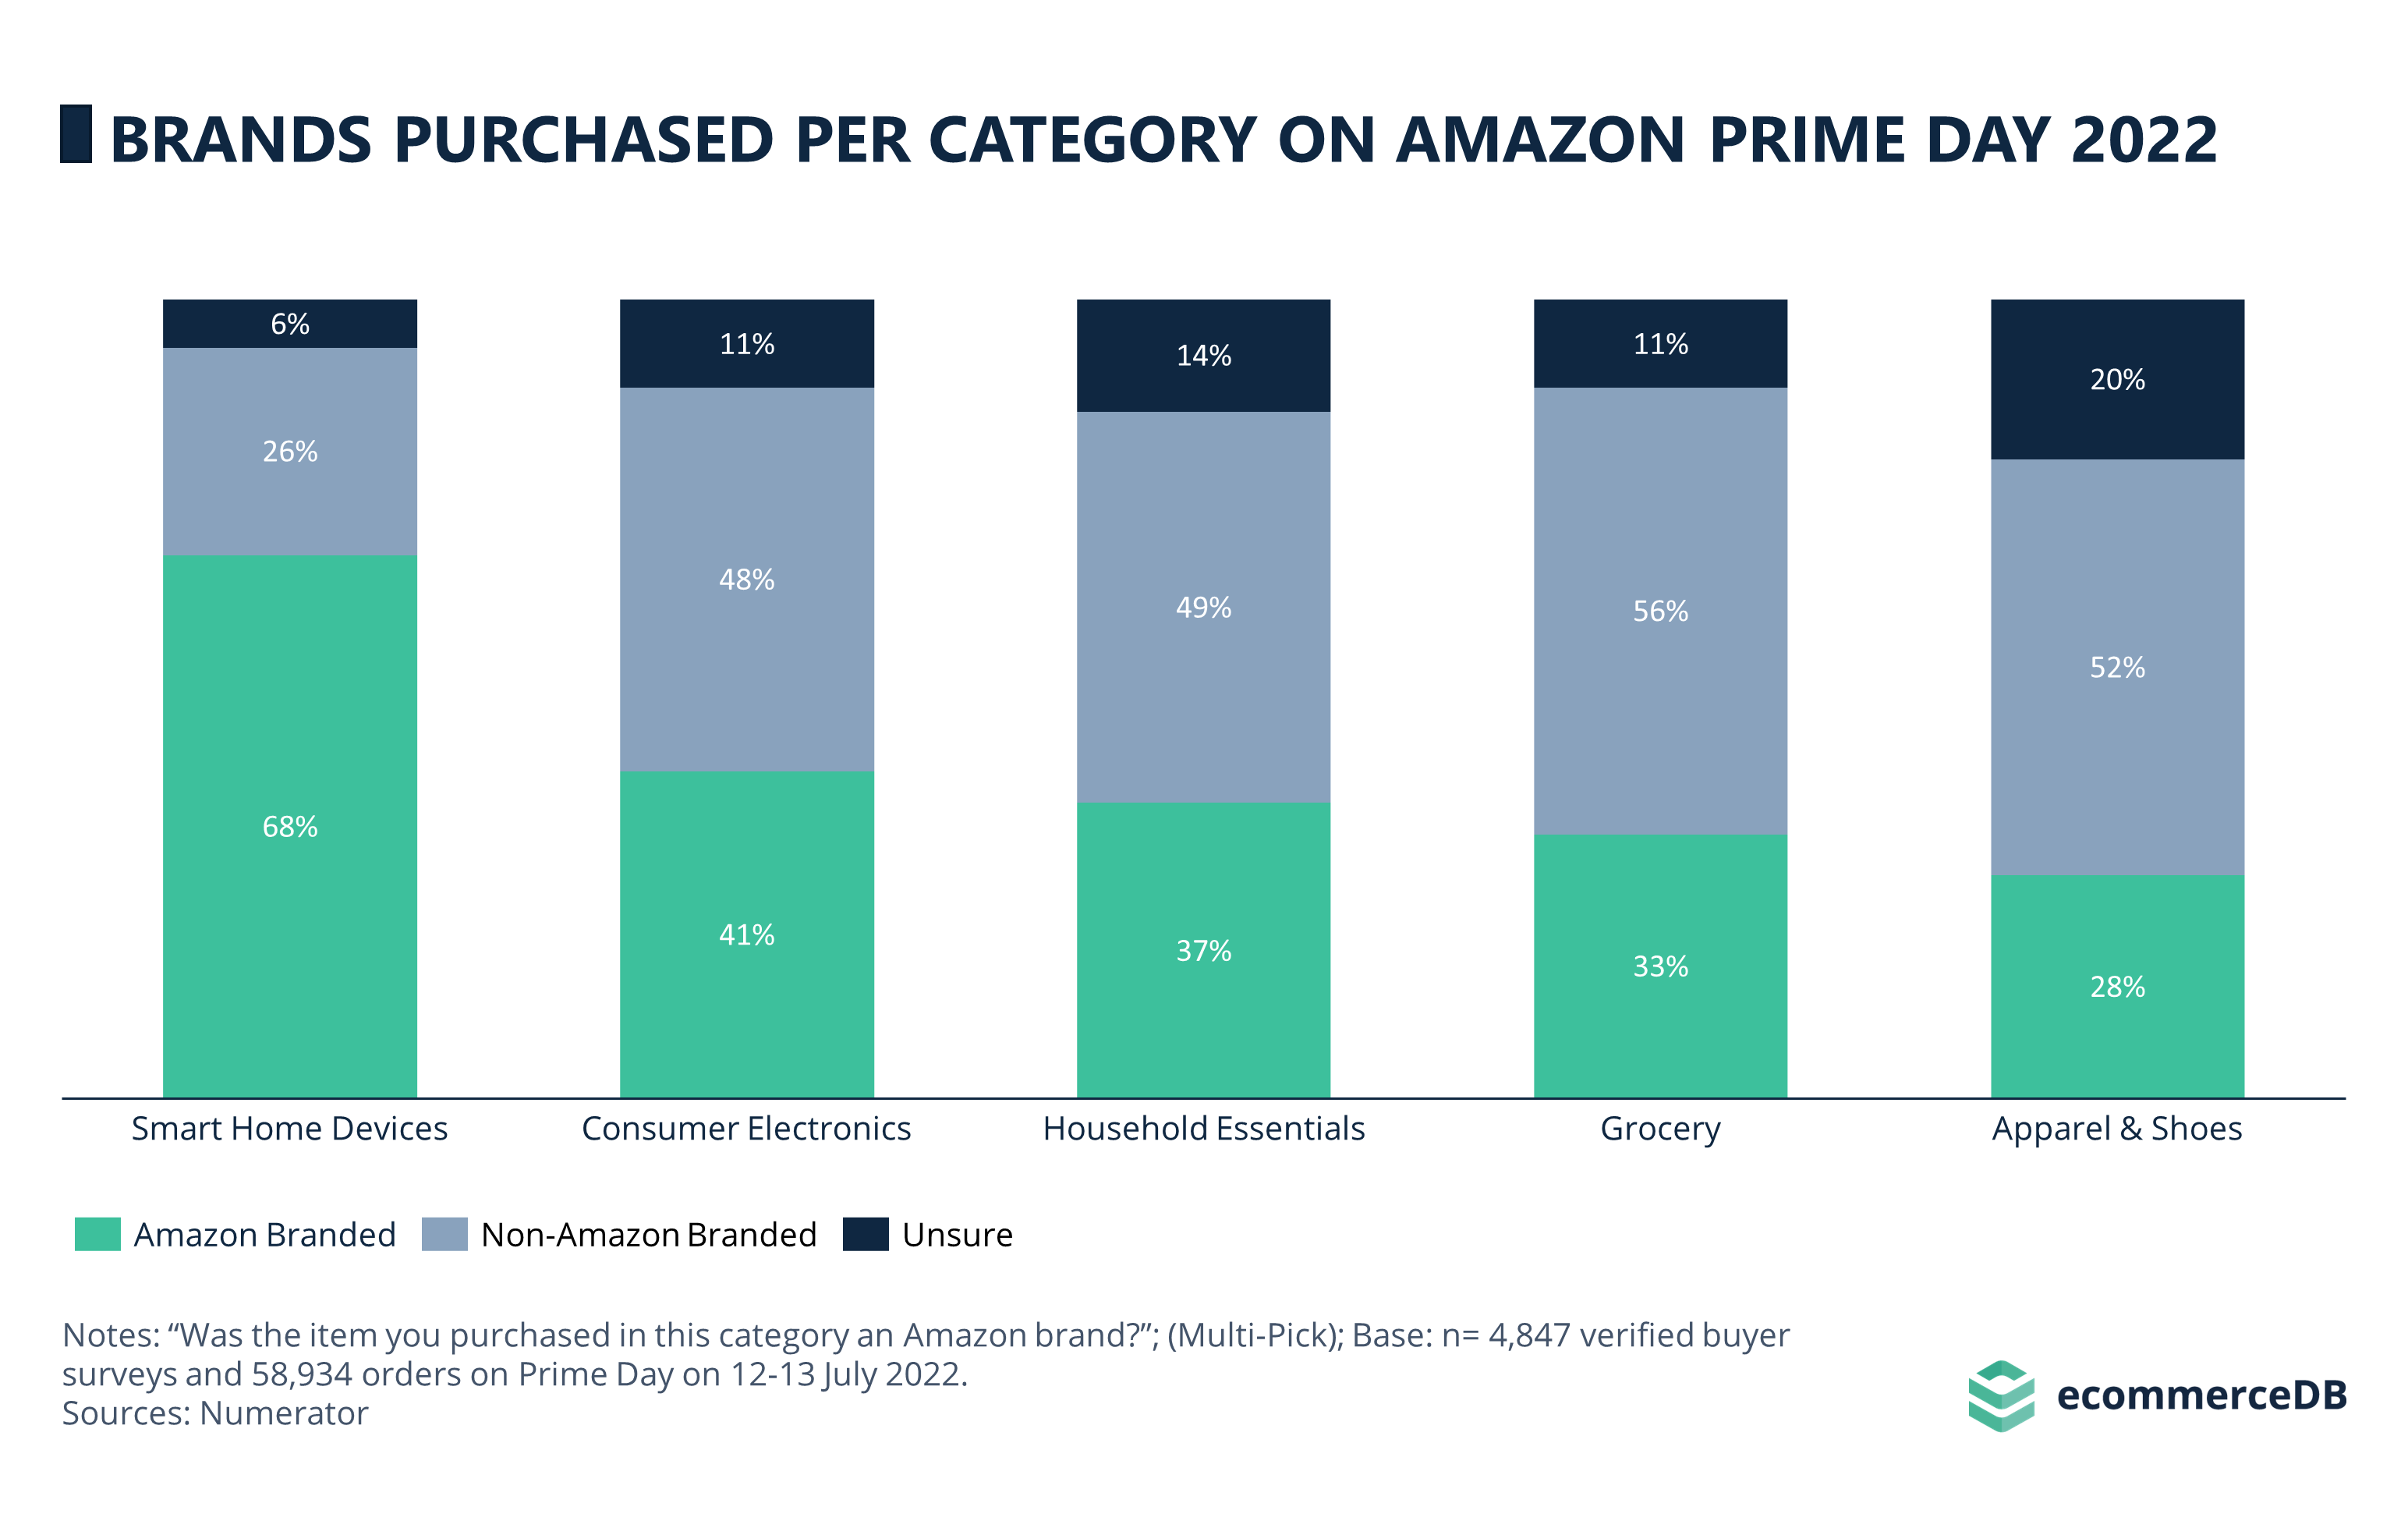 Brands Purchased per Category on Amazon Prime Day 2022